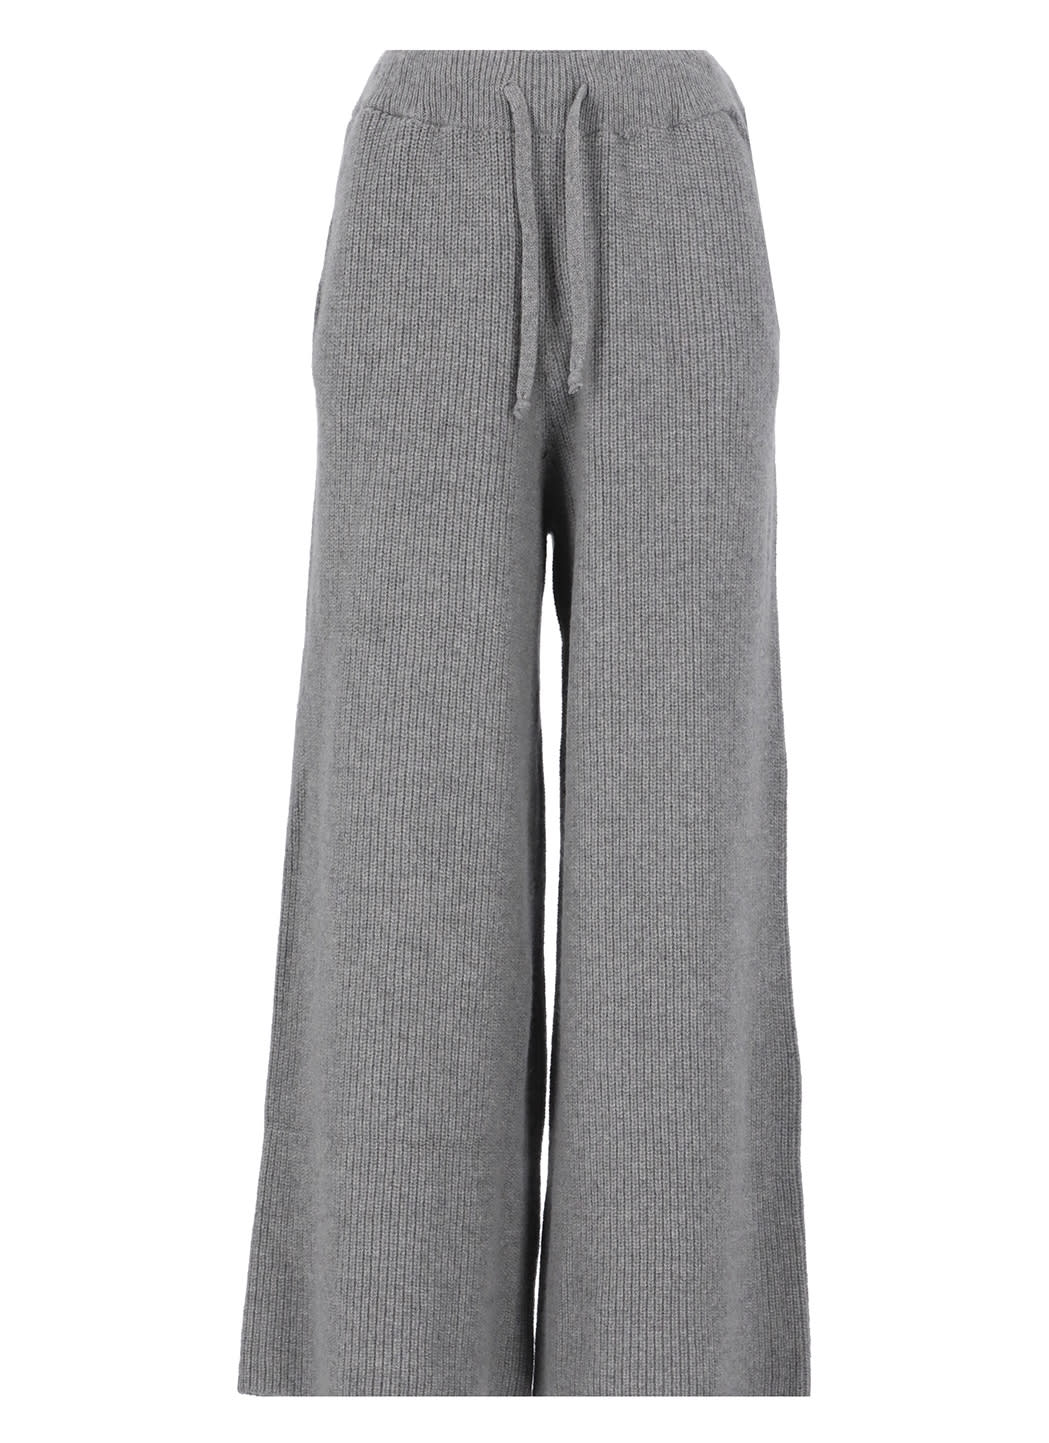 Joshua Sanders Smiley Knitted Trousers